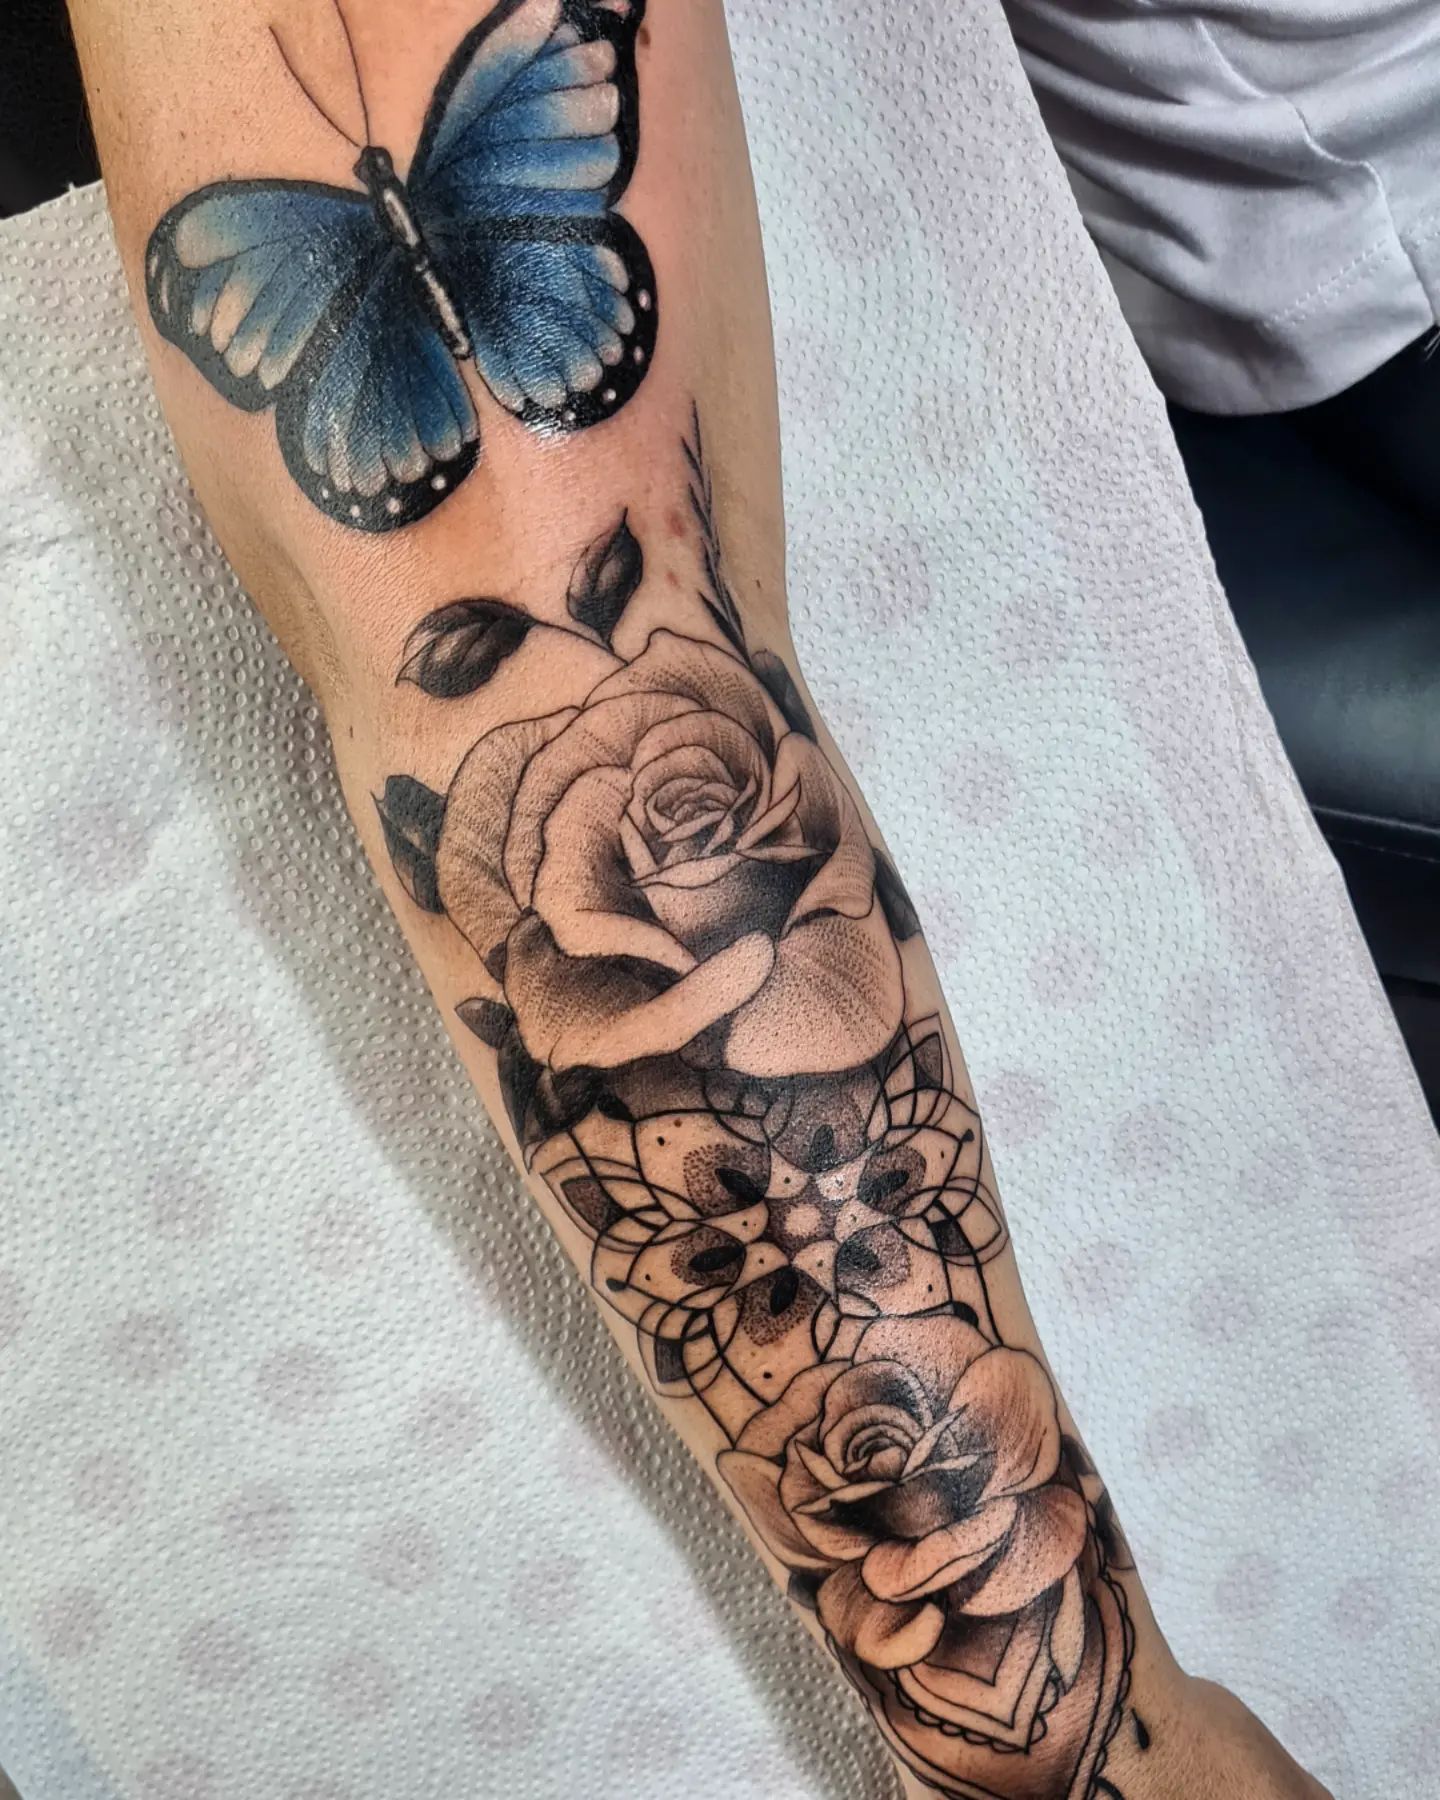 Roses with some nice details will cheer up your forearm. Plus, this tattoo has a vintage vibe.